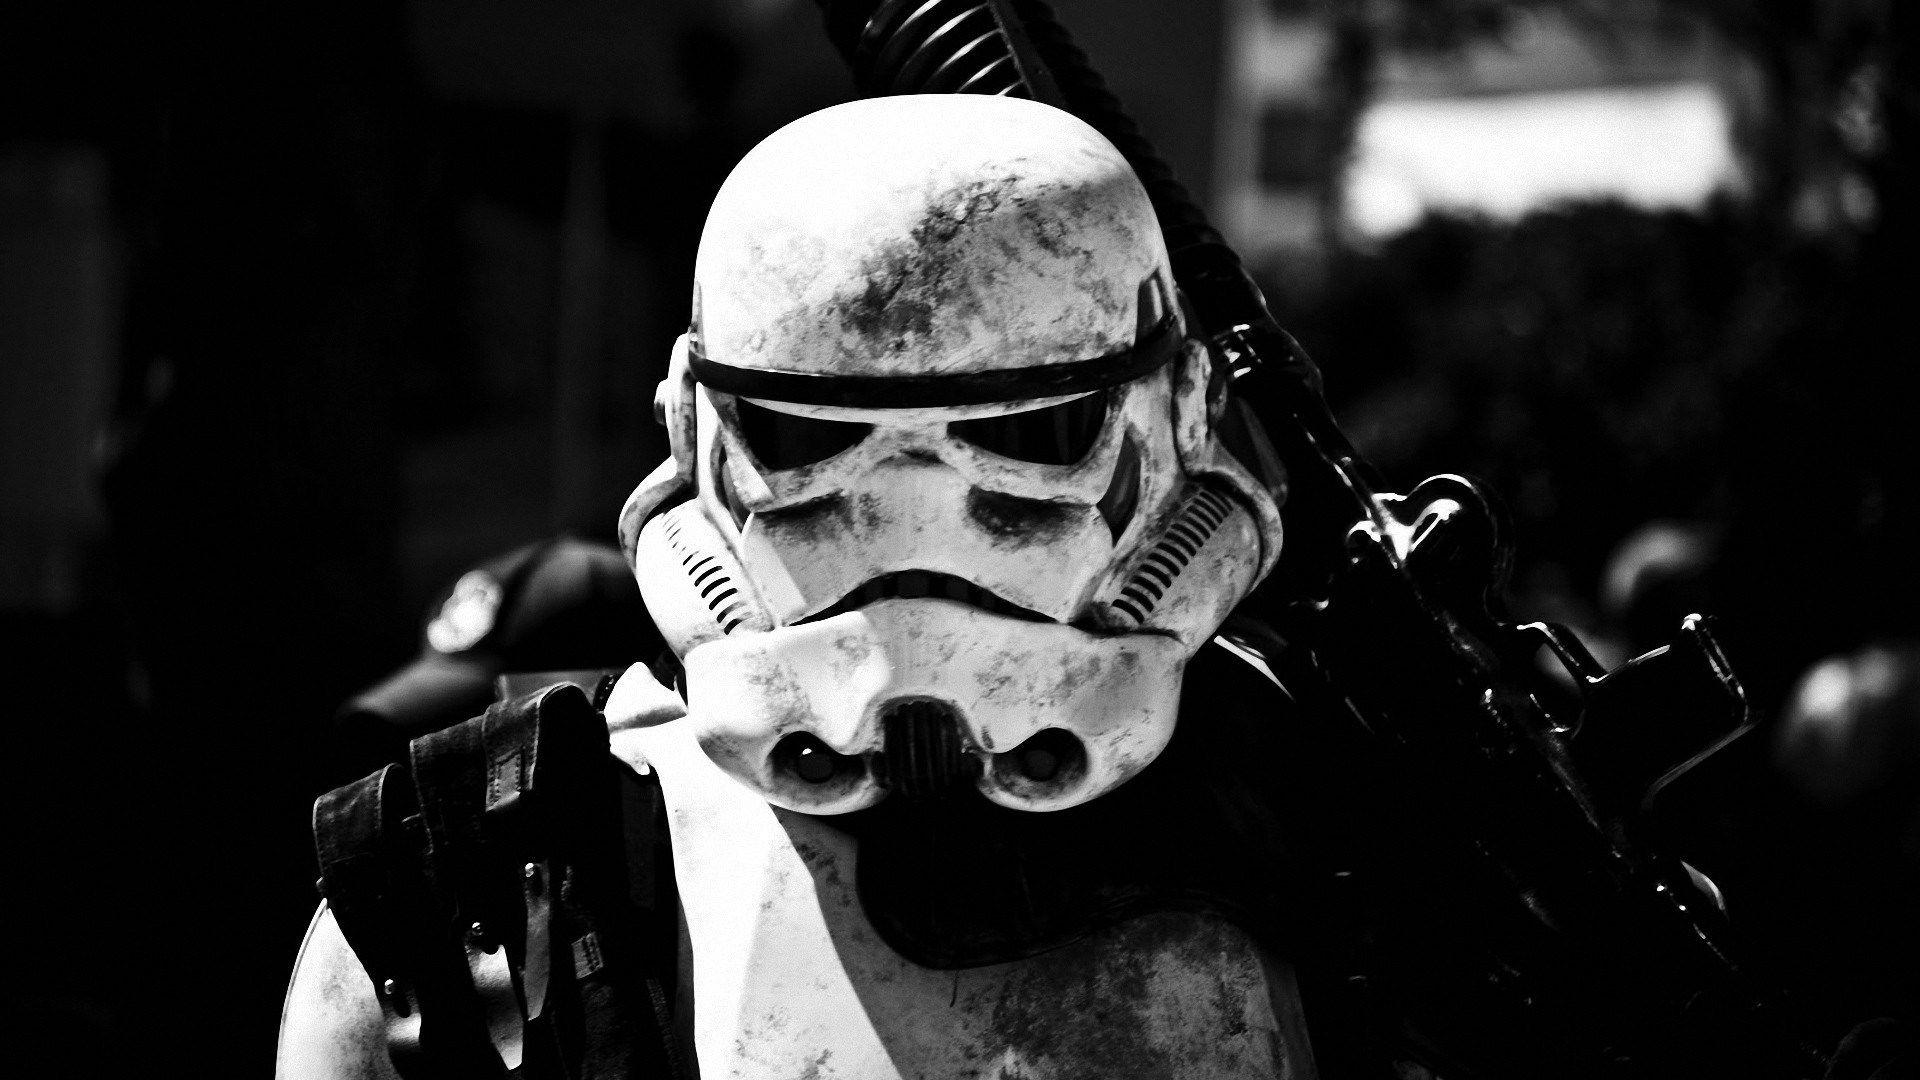 stormtrooper wallpaper picture free, 1920 x 1080 263 kB